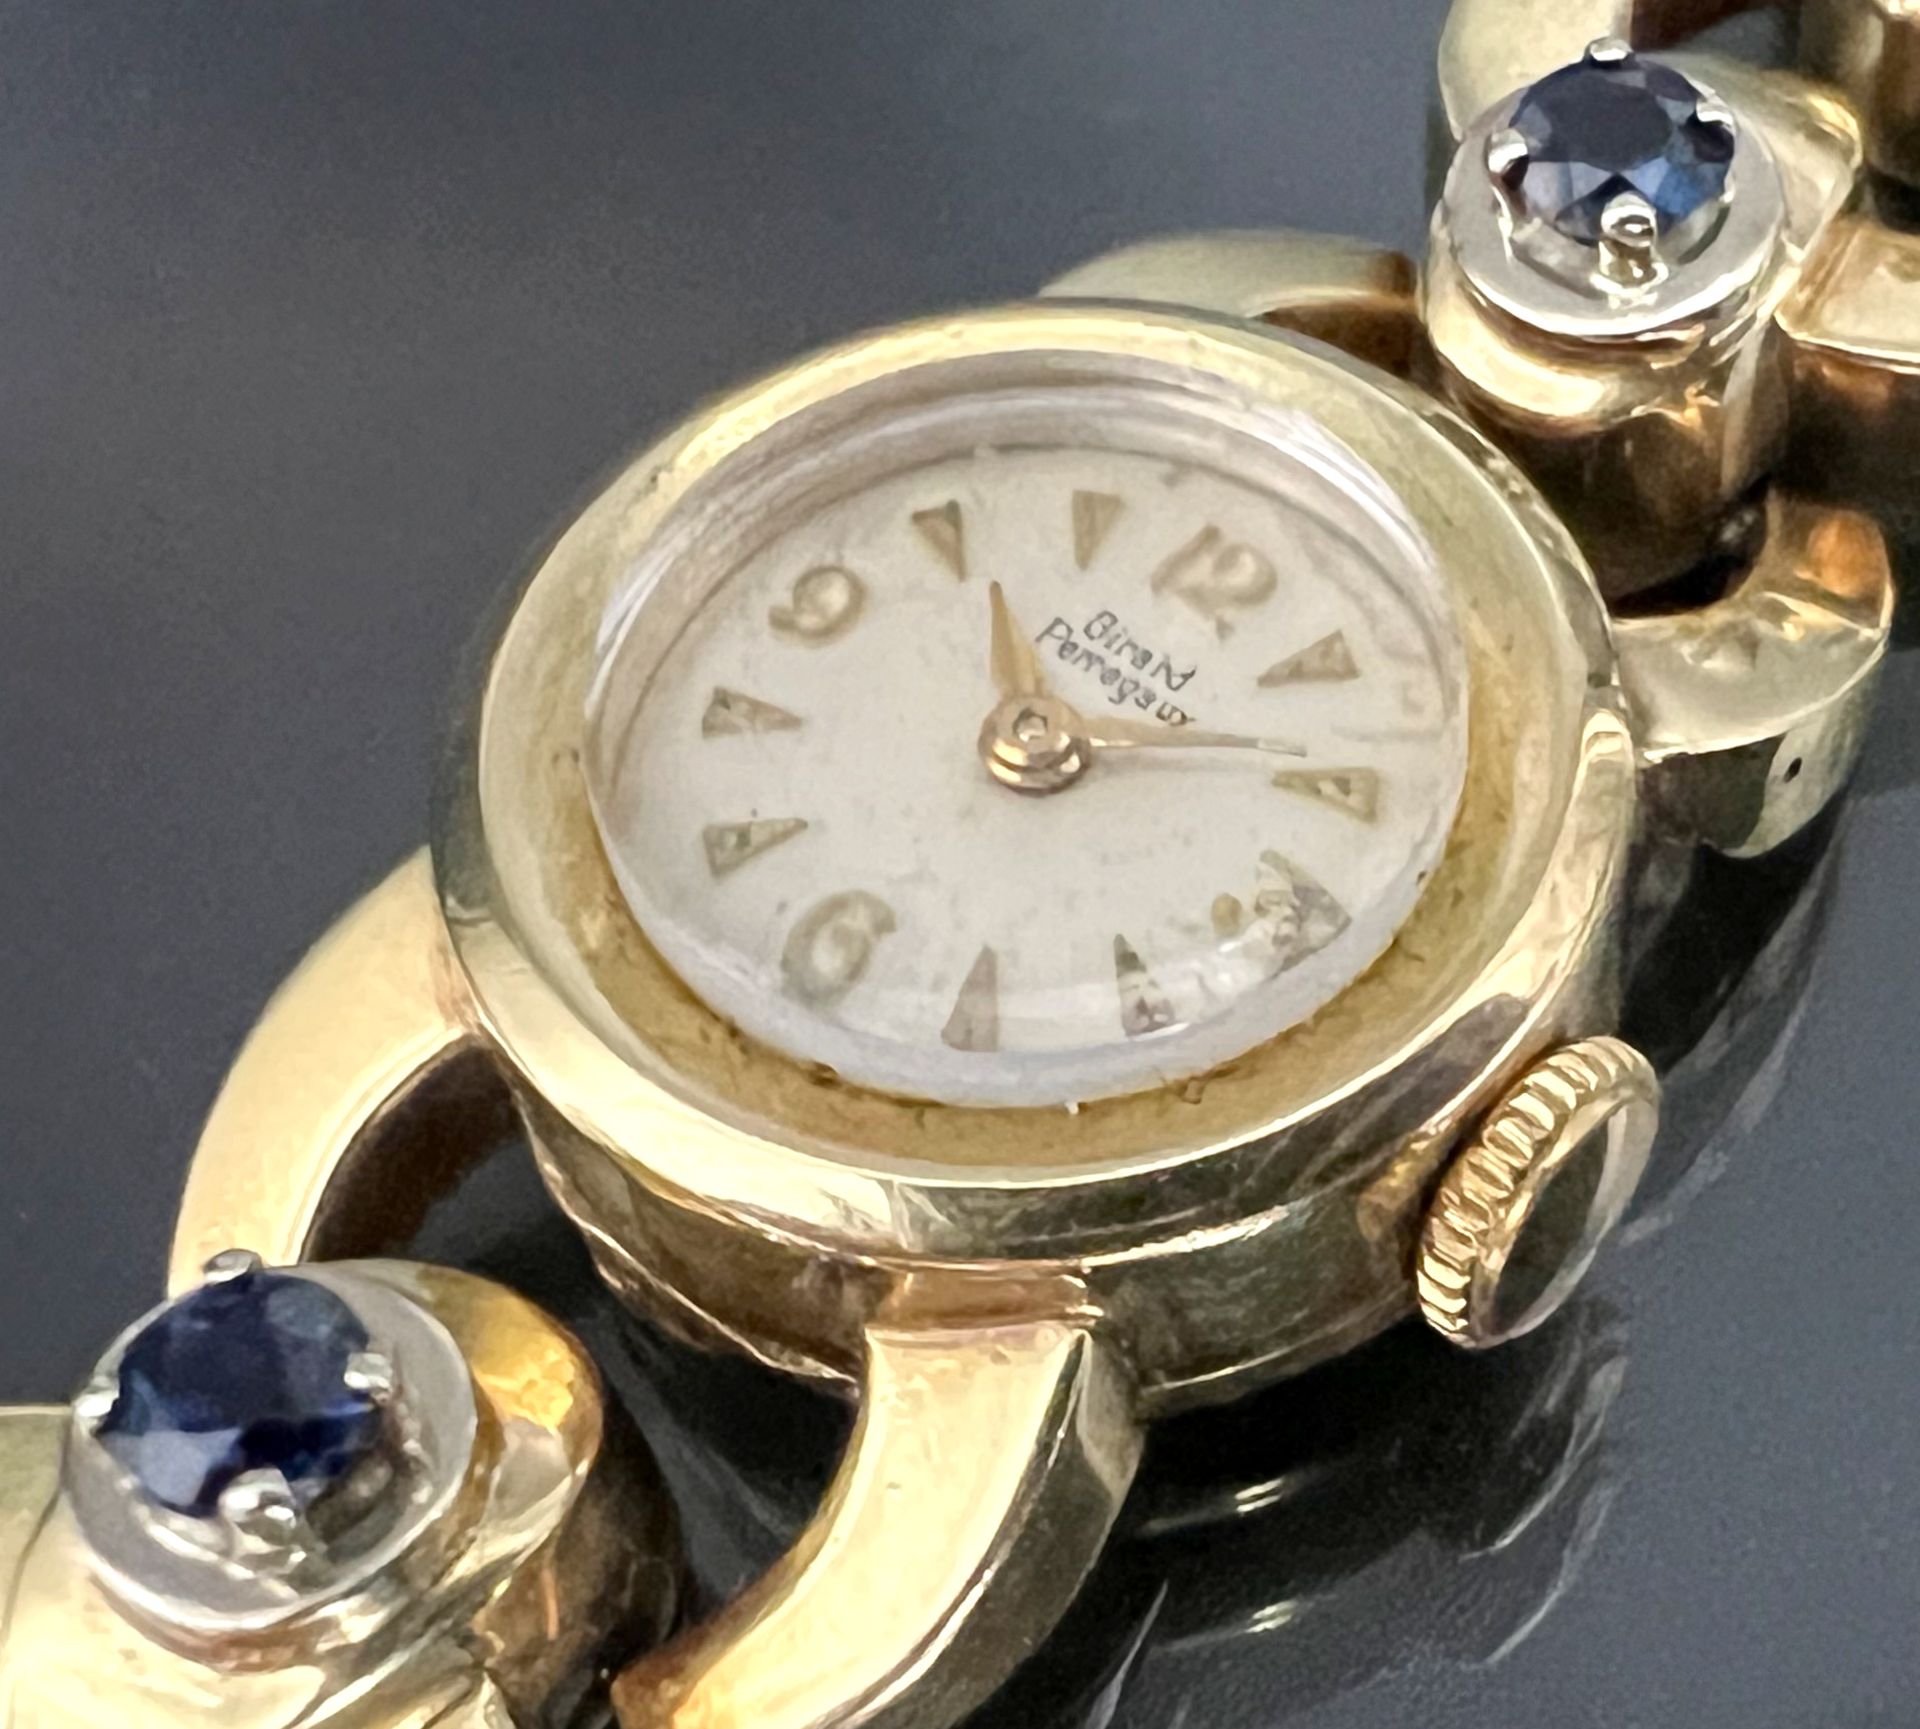 GIRARD-PERREGAUX ladies' wristwatch. 585 yellow gold with 2 diamonds and 4 sapphires. - Image 7 of 10